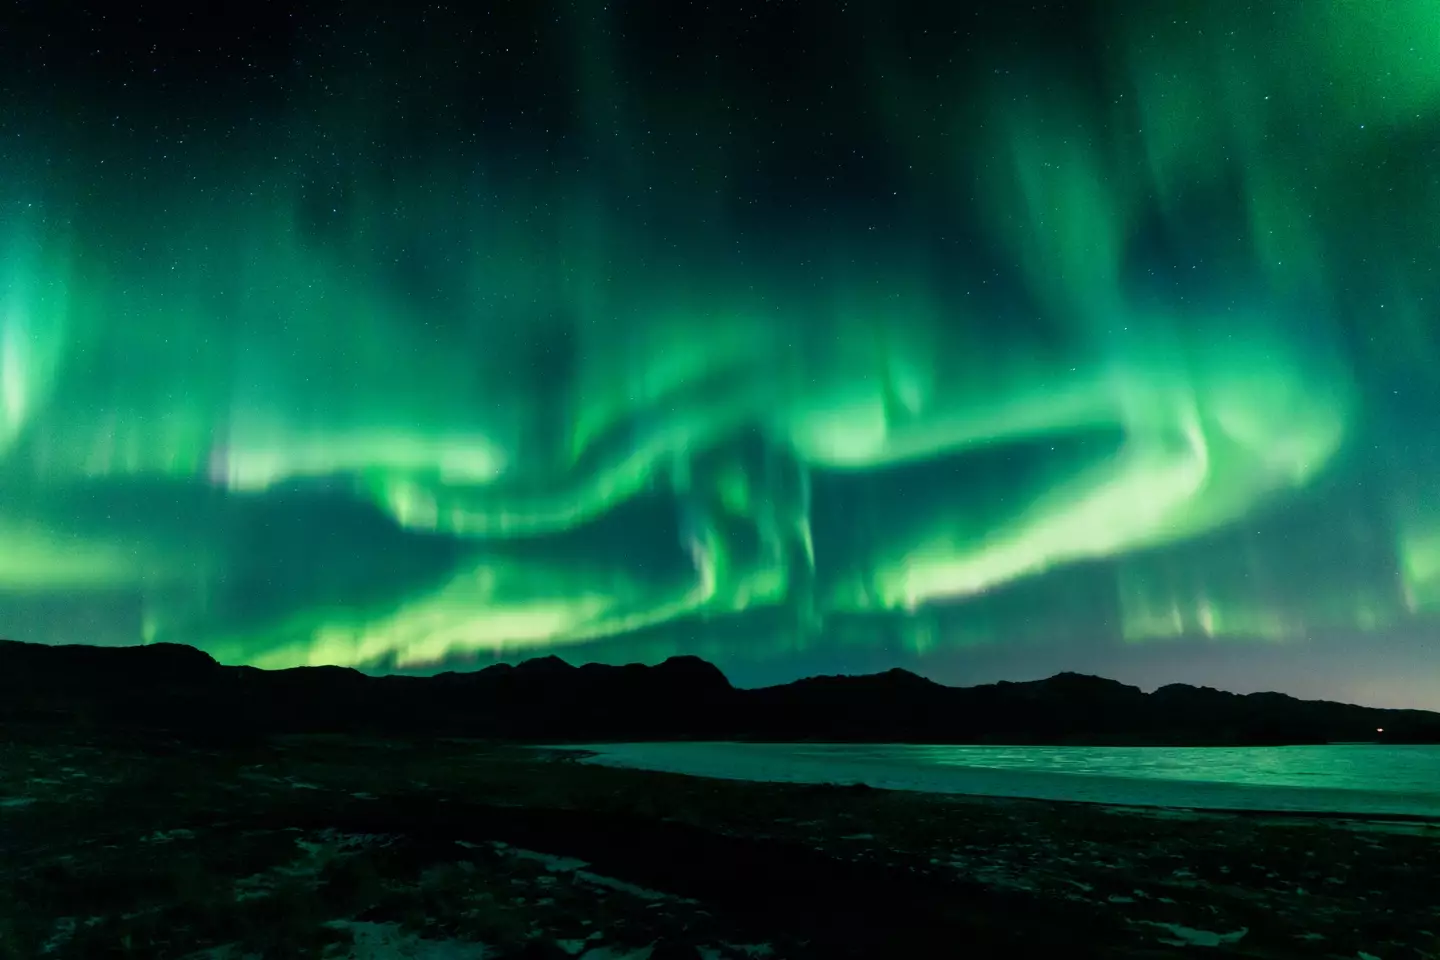 The solar winds can lead to auroras on Earth.